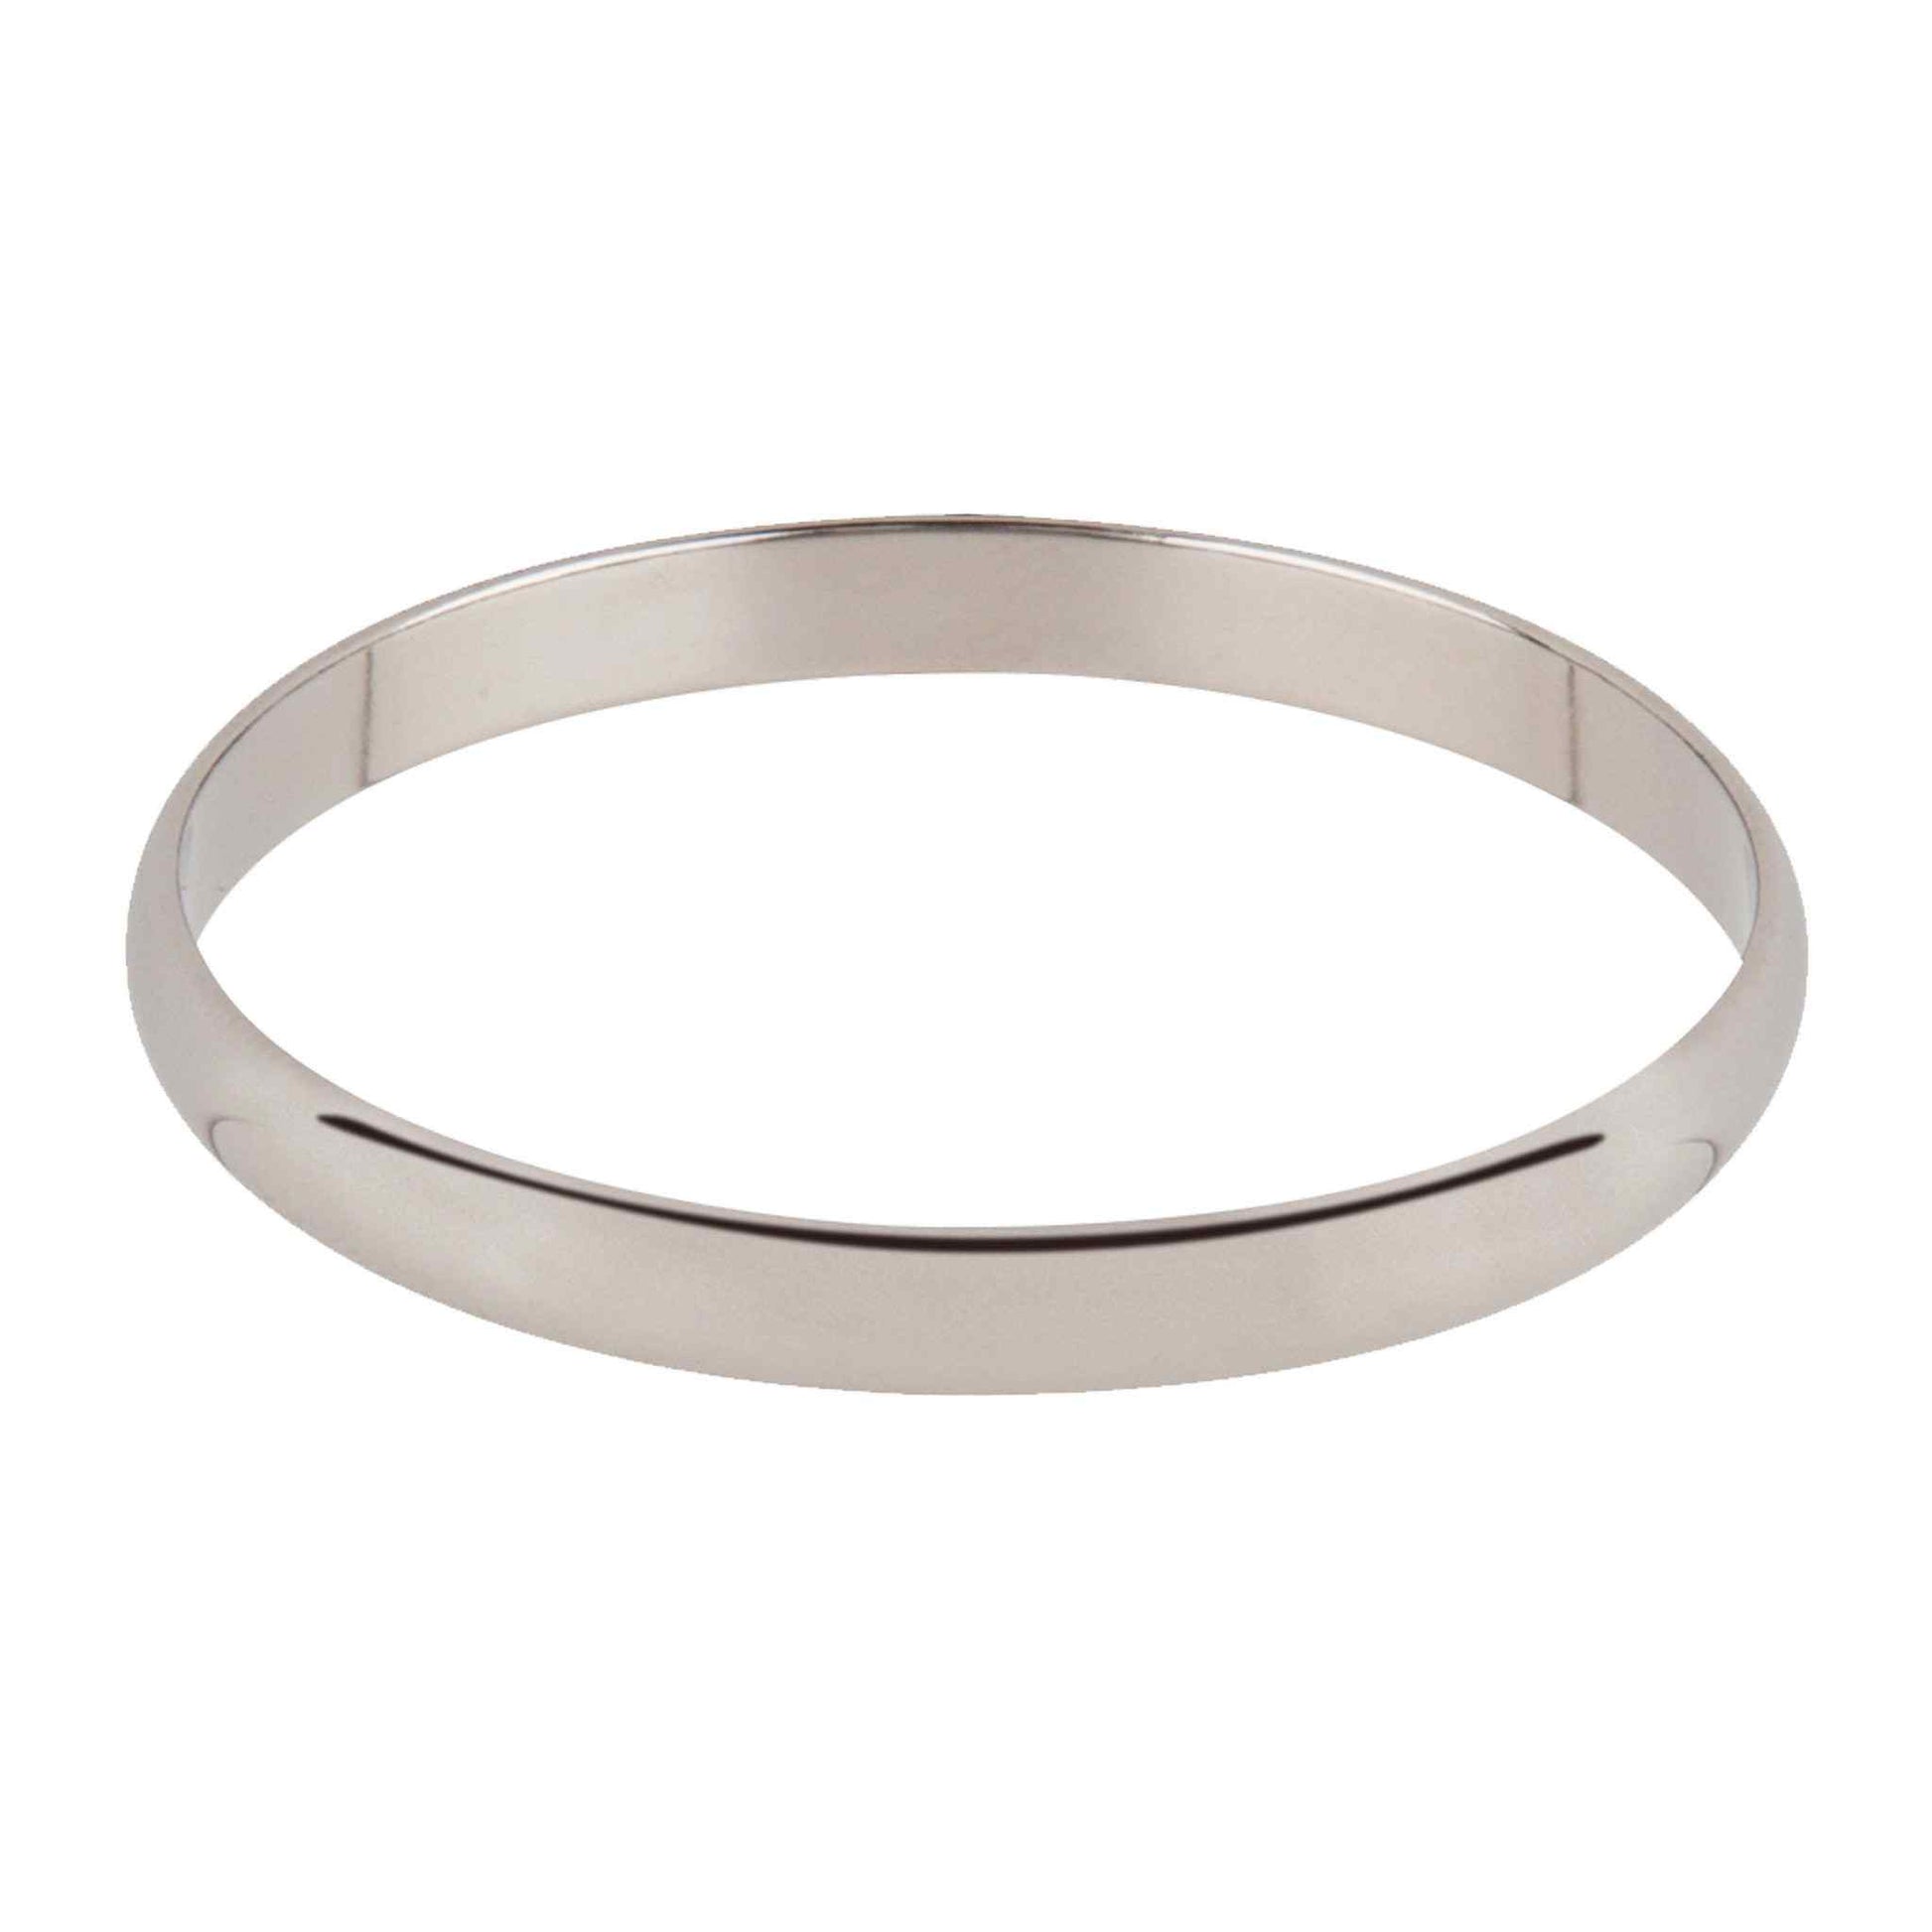 A engravable baby bangle bracelet displayed on a neutral white background.